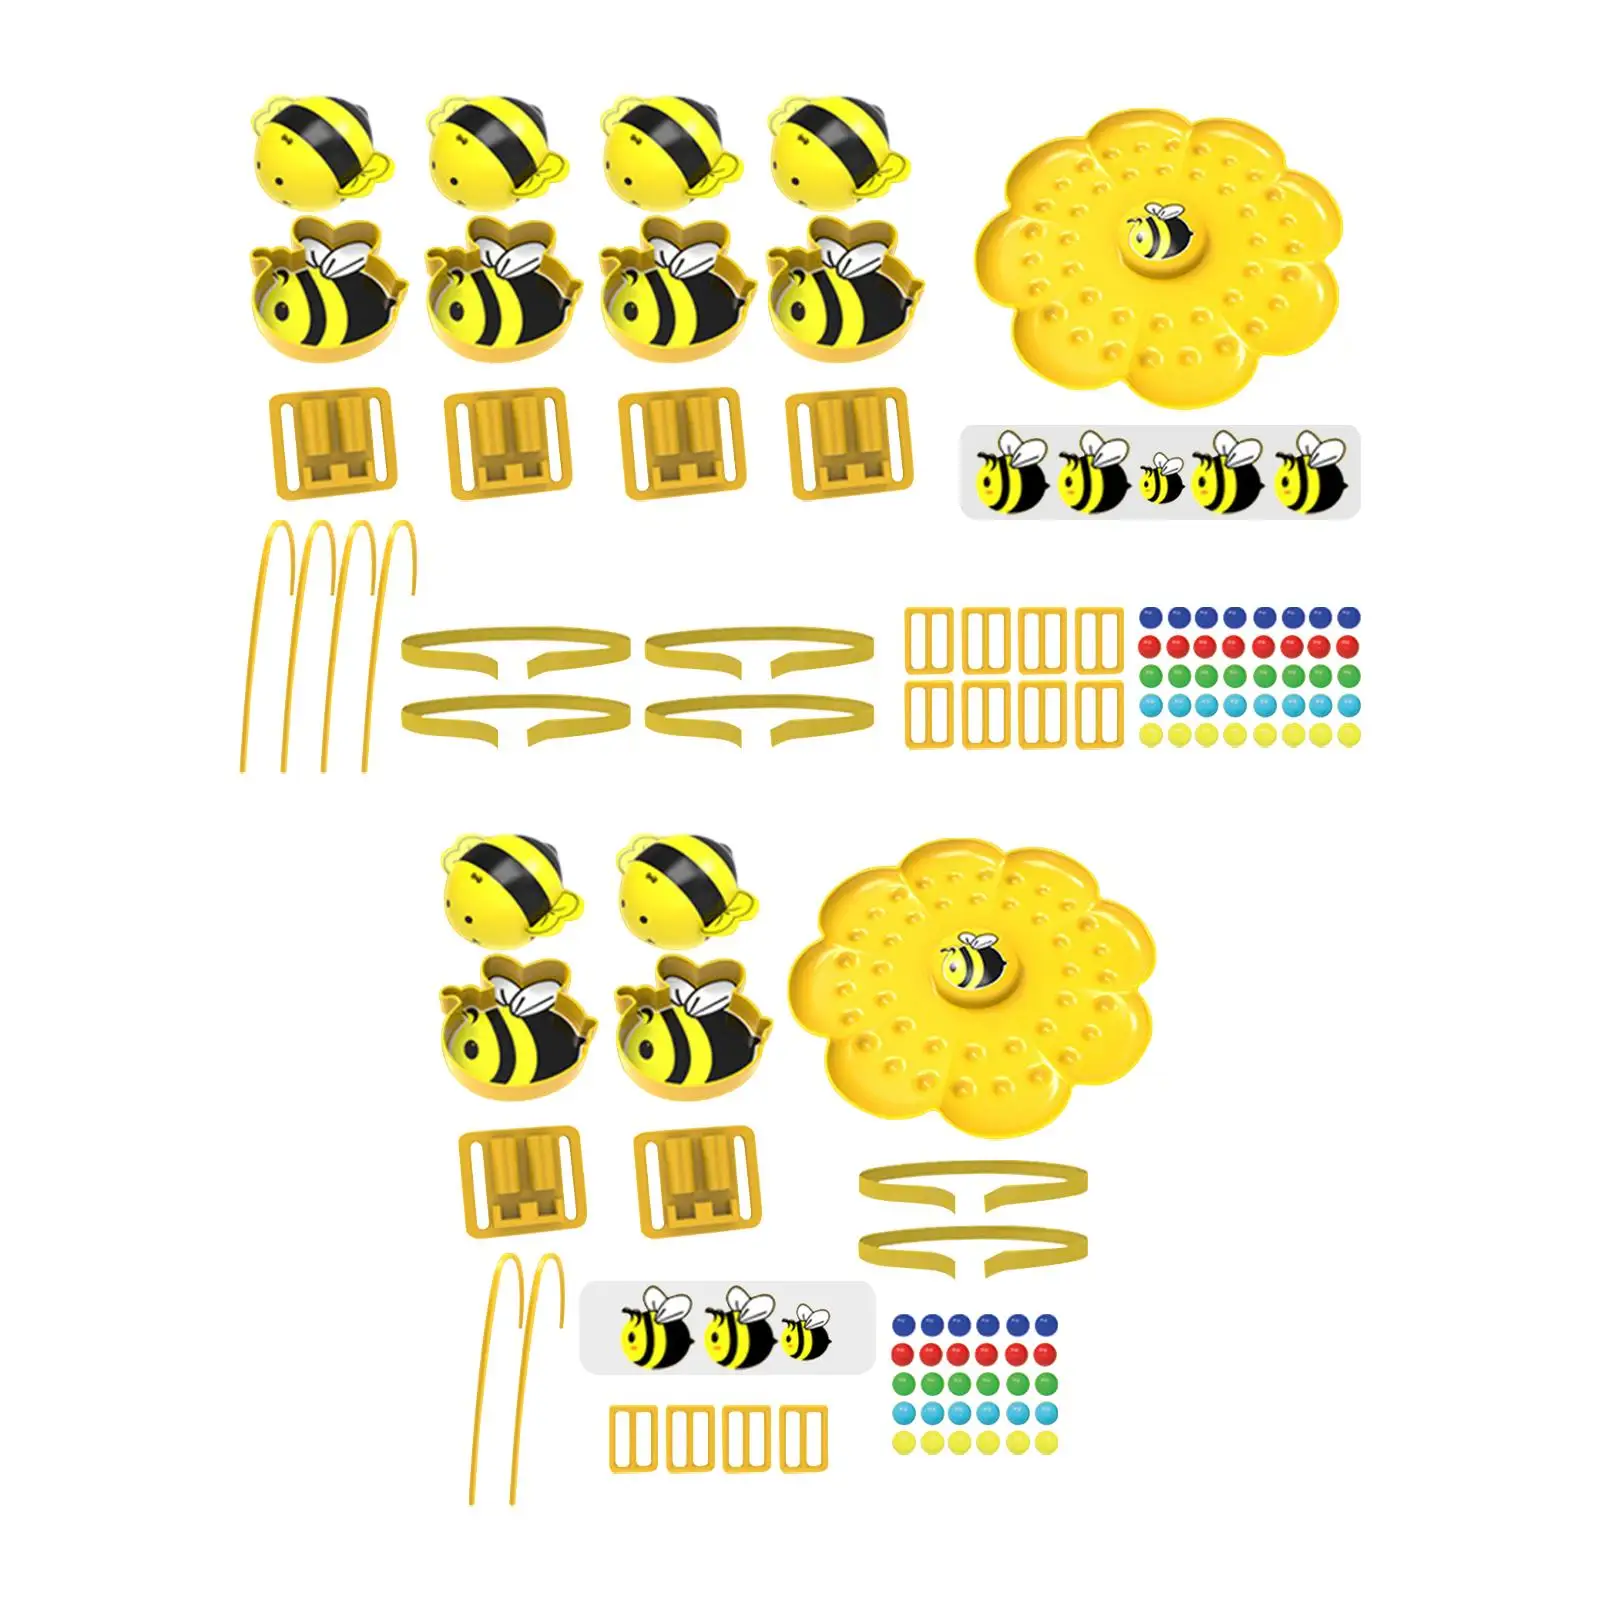 Forehead Fishing Game Toy Counting Toy Development Toy Magnetics Bead Little Bee Montessori Toy for Girls Boys Kids Children